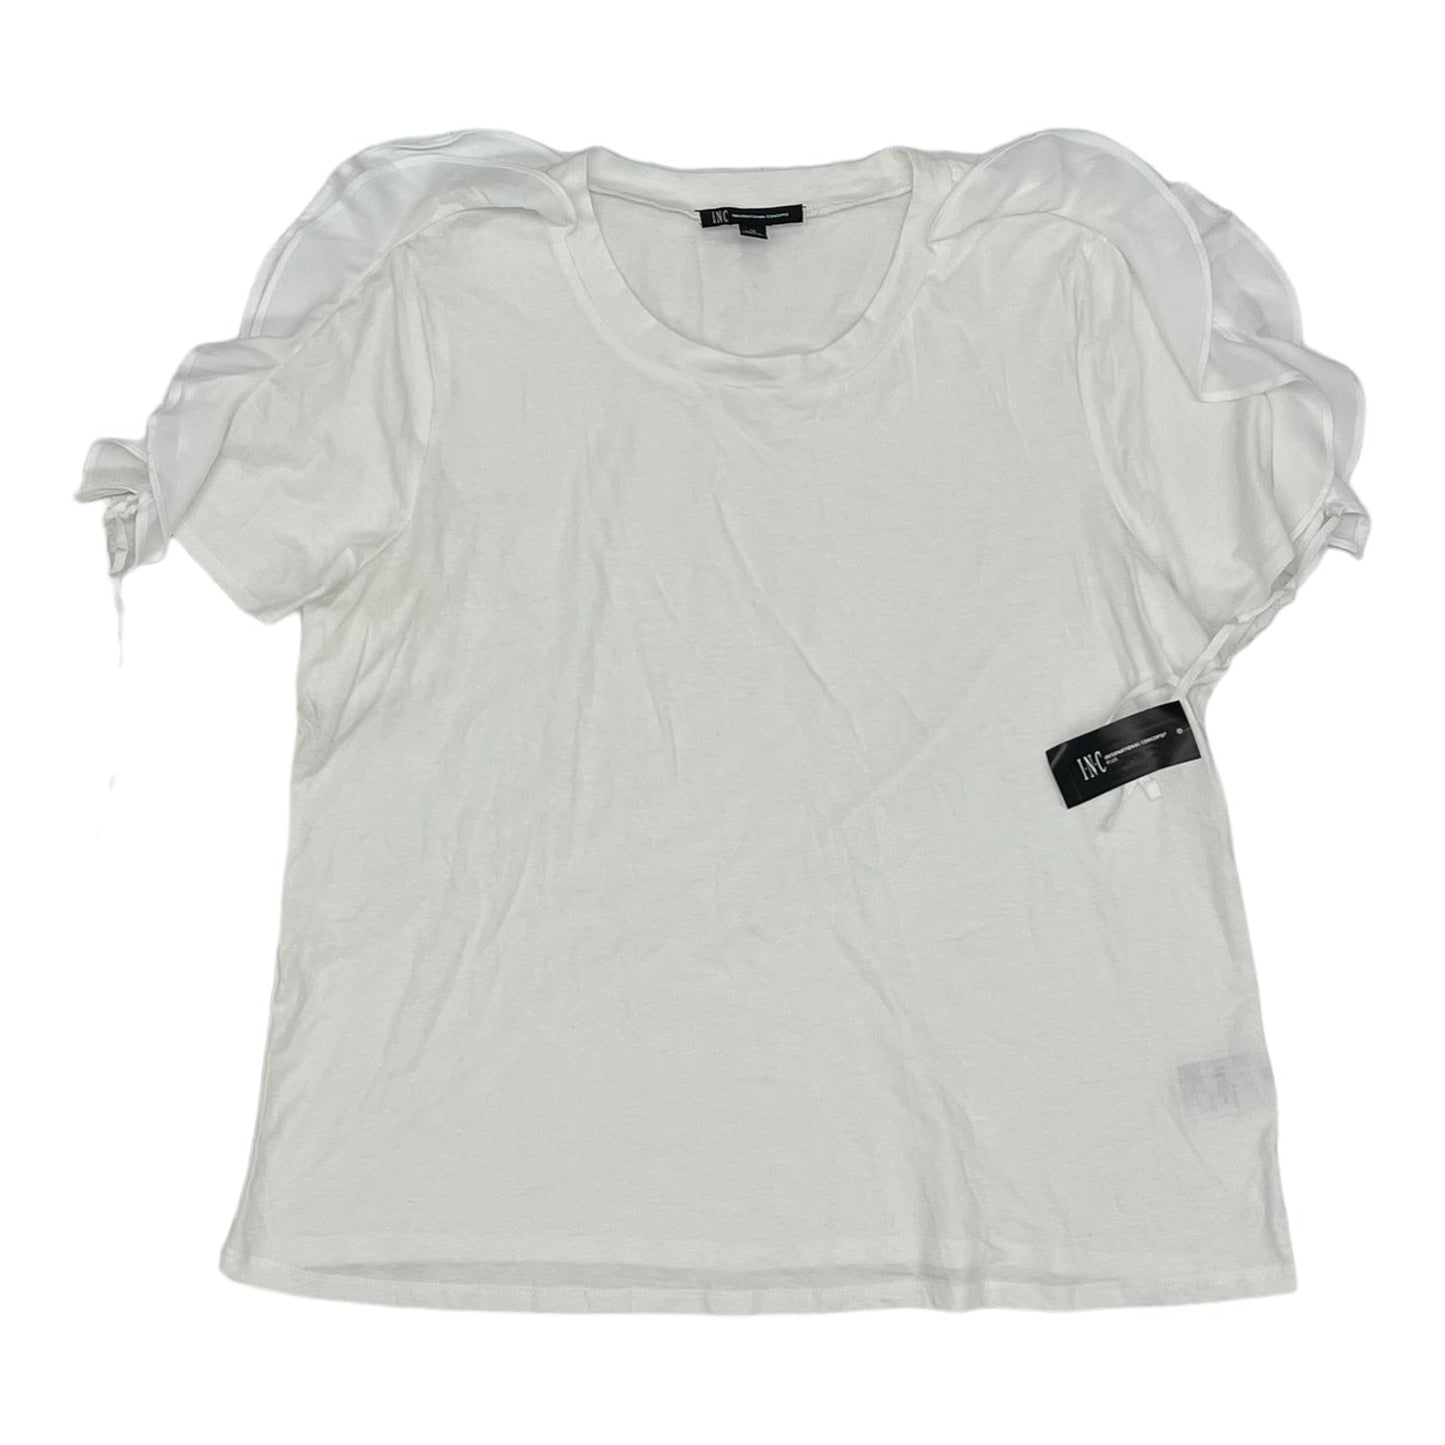 WHITE TOP SS by INC Size:1X